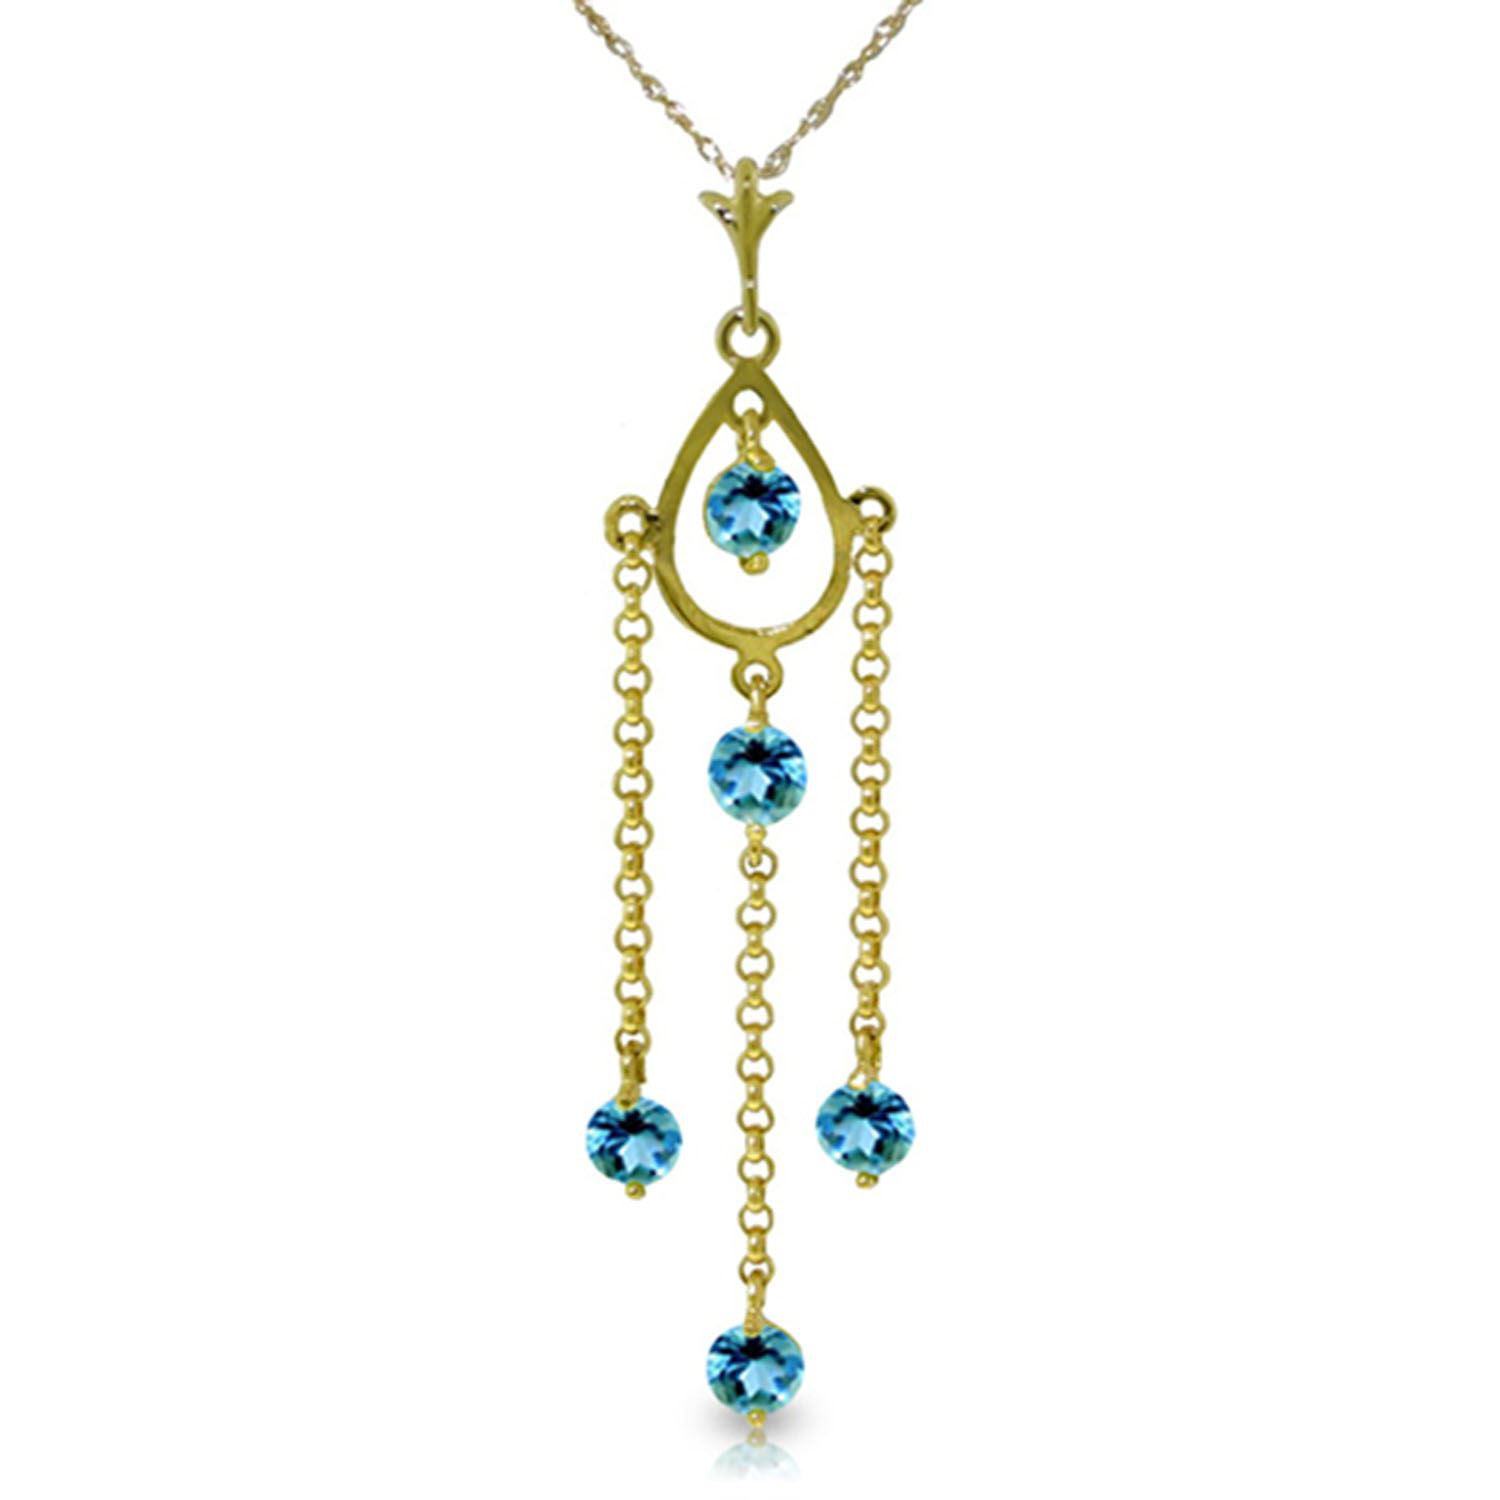 ALARRI 14K Solid Gold Heart Necklace w/ Natural Blue Topaz with 18 Inch Chain Length